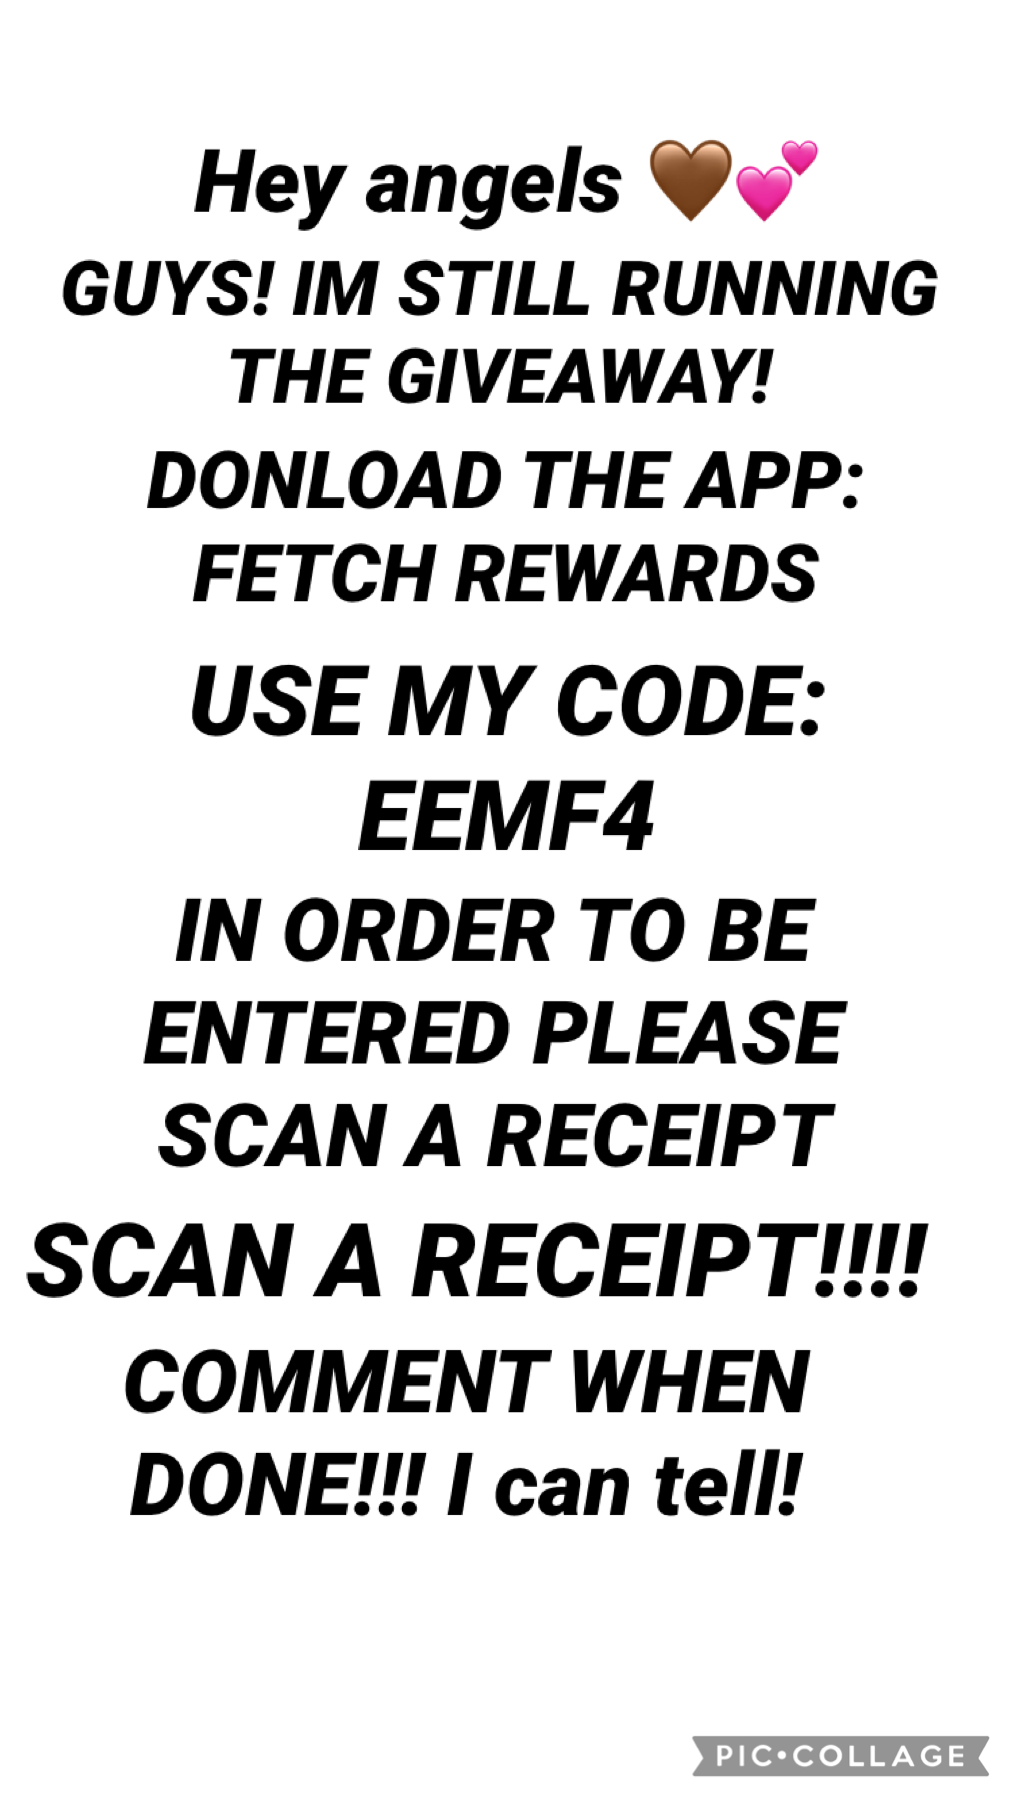 AFTER USING MY CODE: EEMF4, SCAN A RECEIPT TO BE FULLY ENTERED!!!